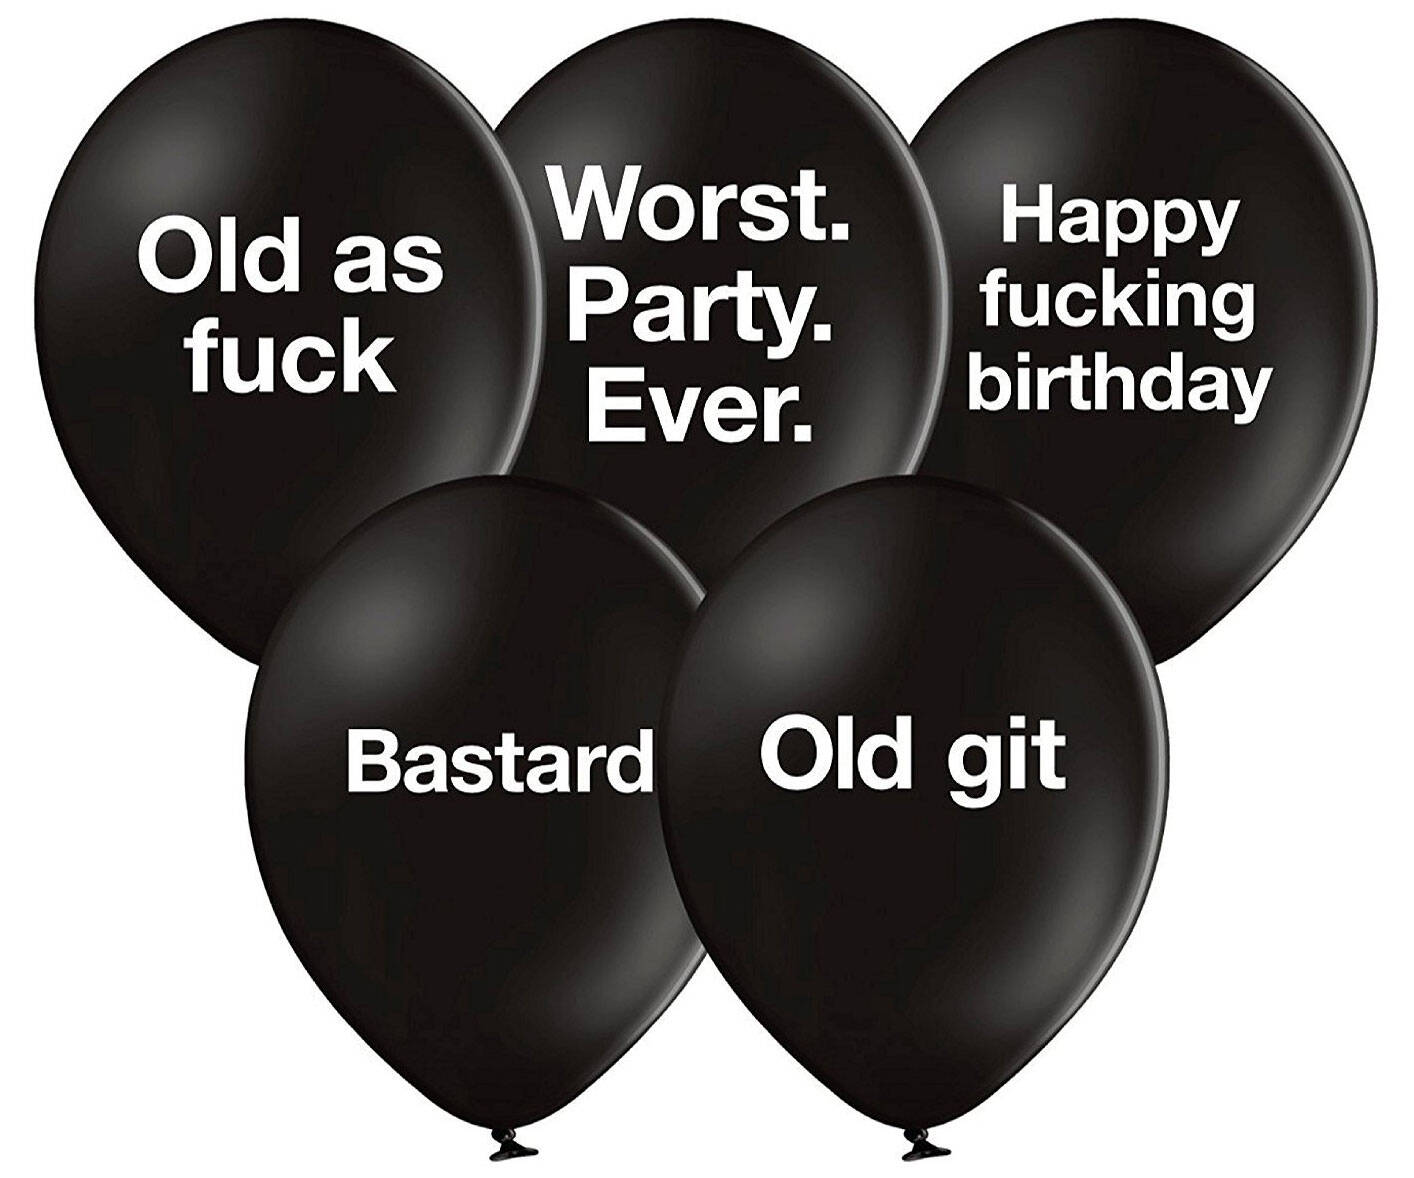 Abusive Birthday Balloons - //coolthings.us